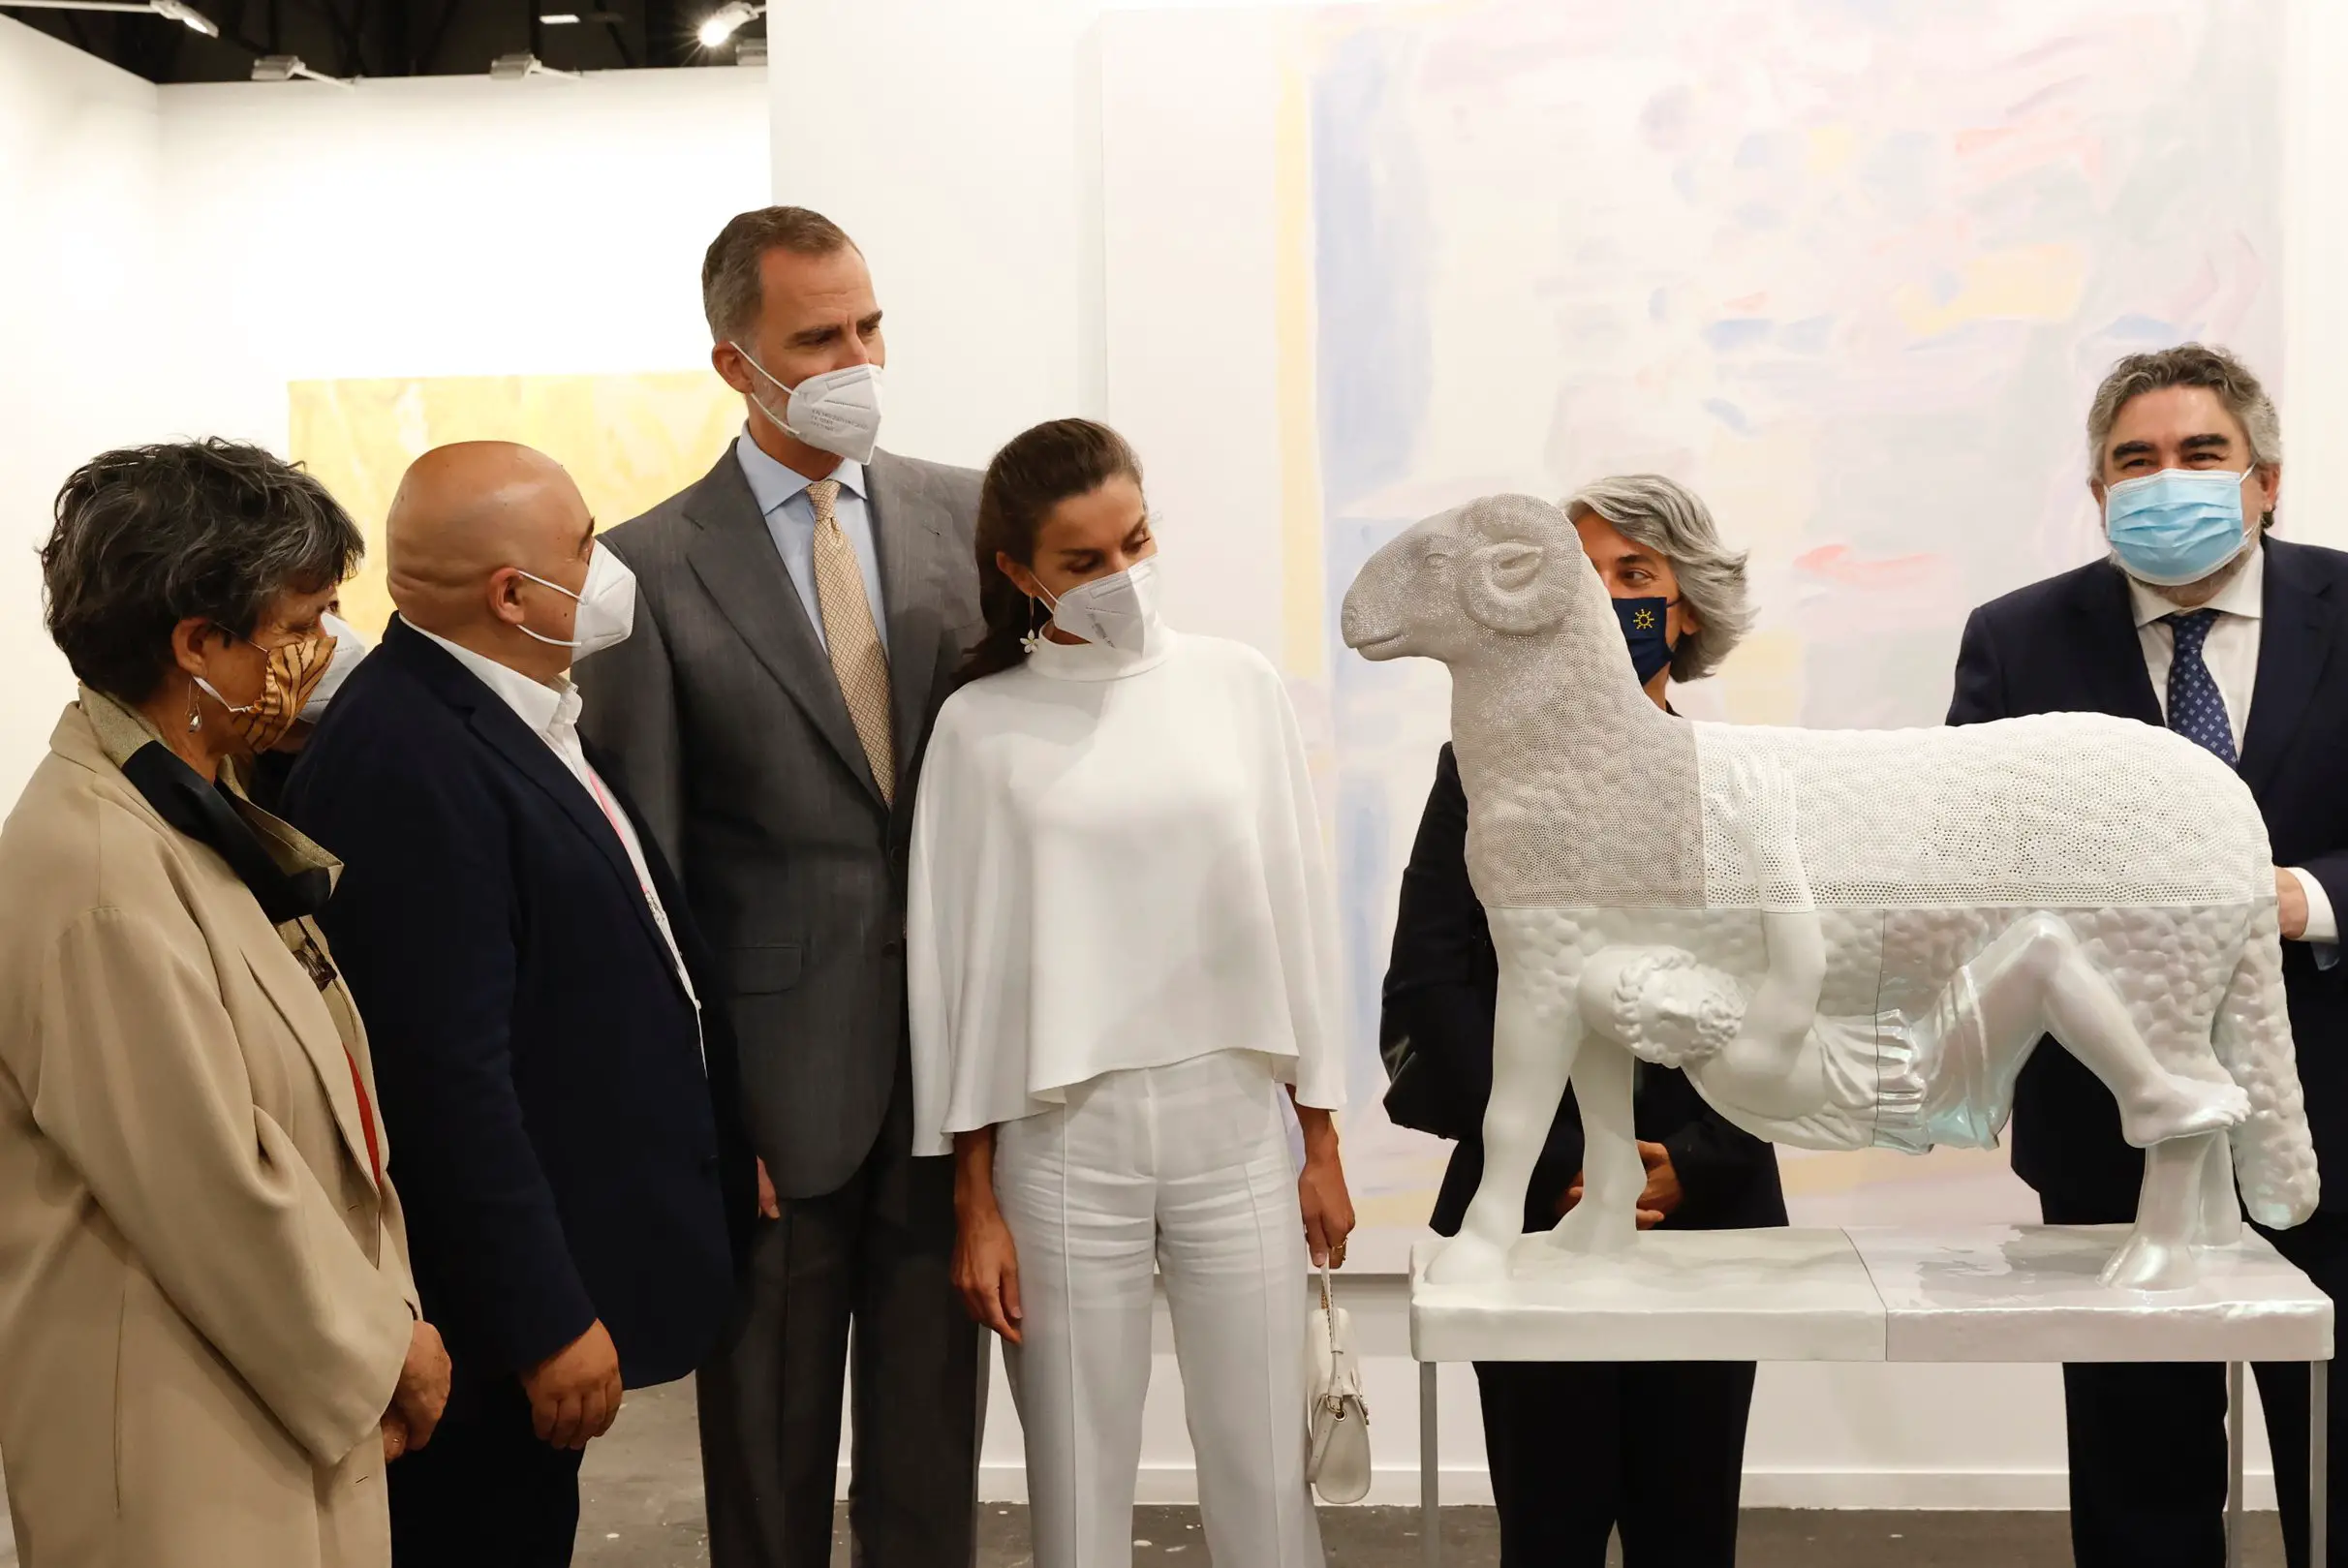 King Felipe and Queen Letizia toured various galleries being displayed at the art fair